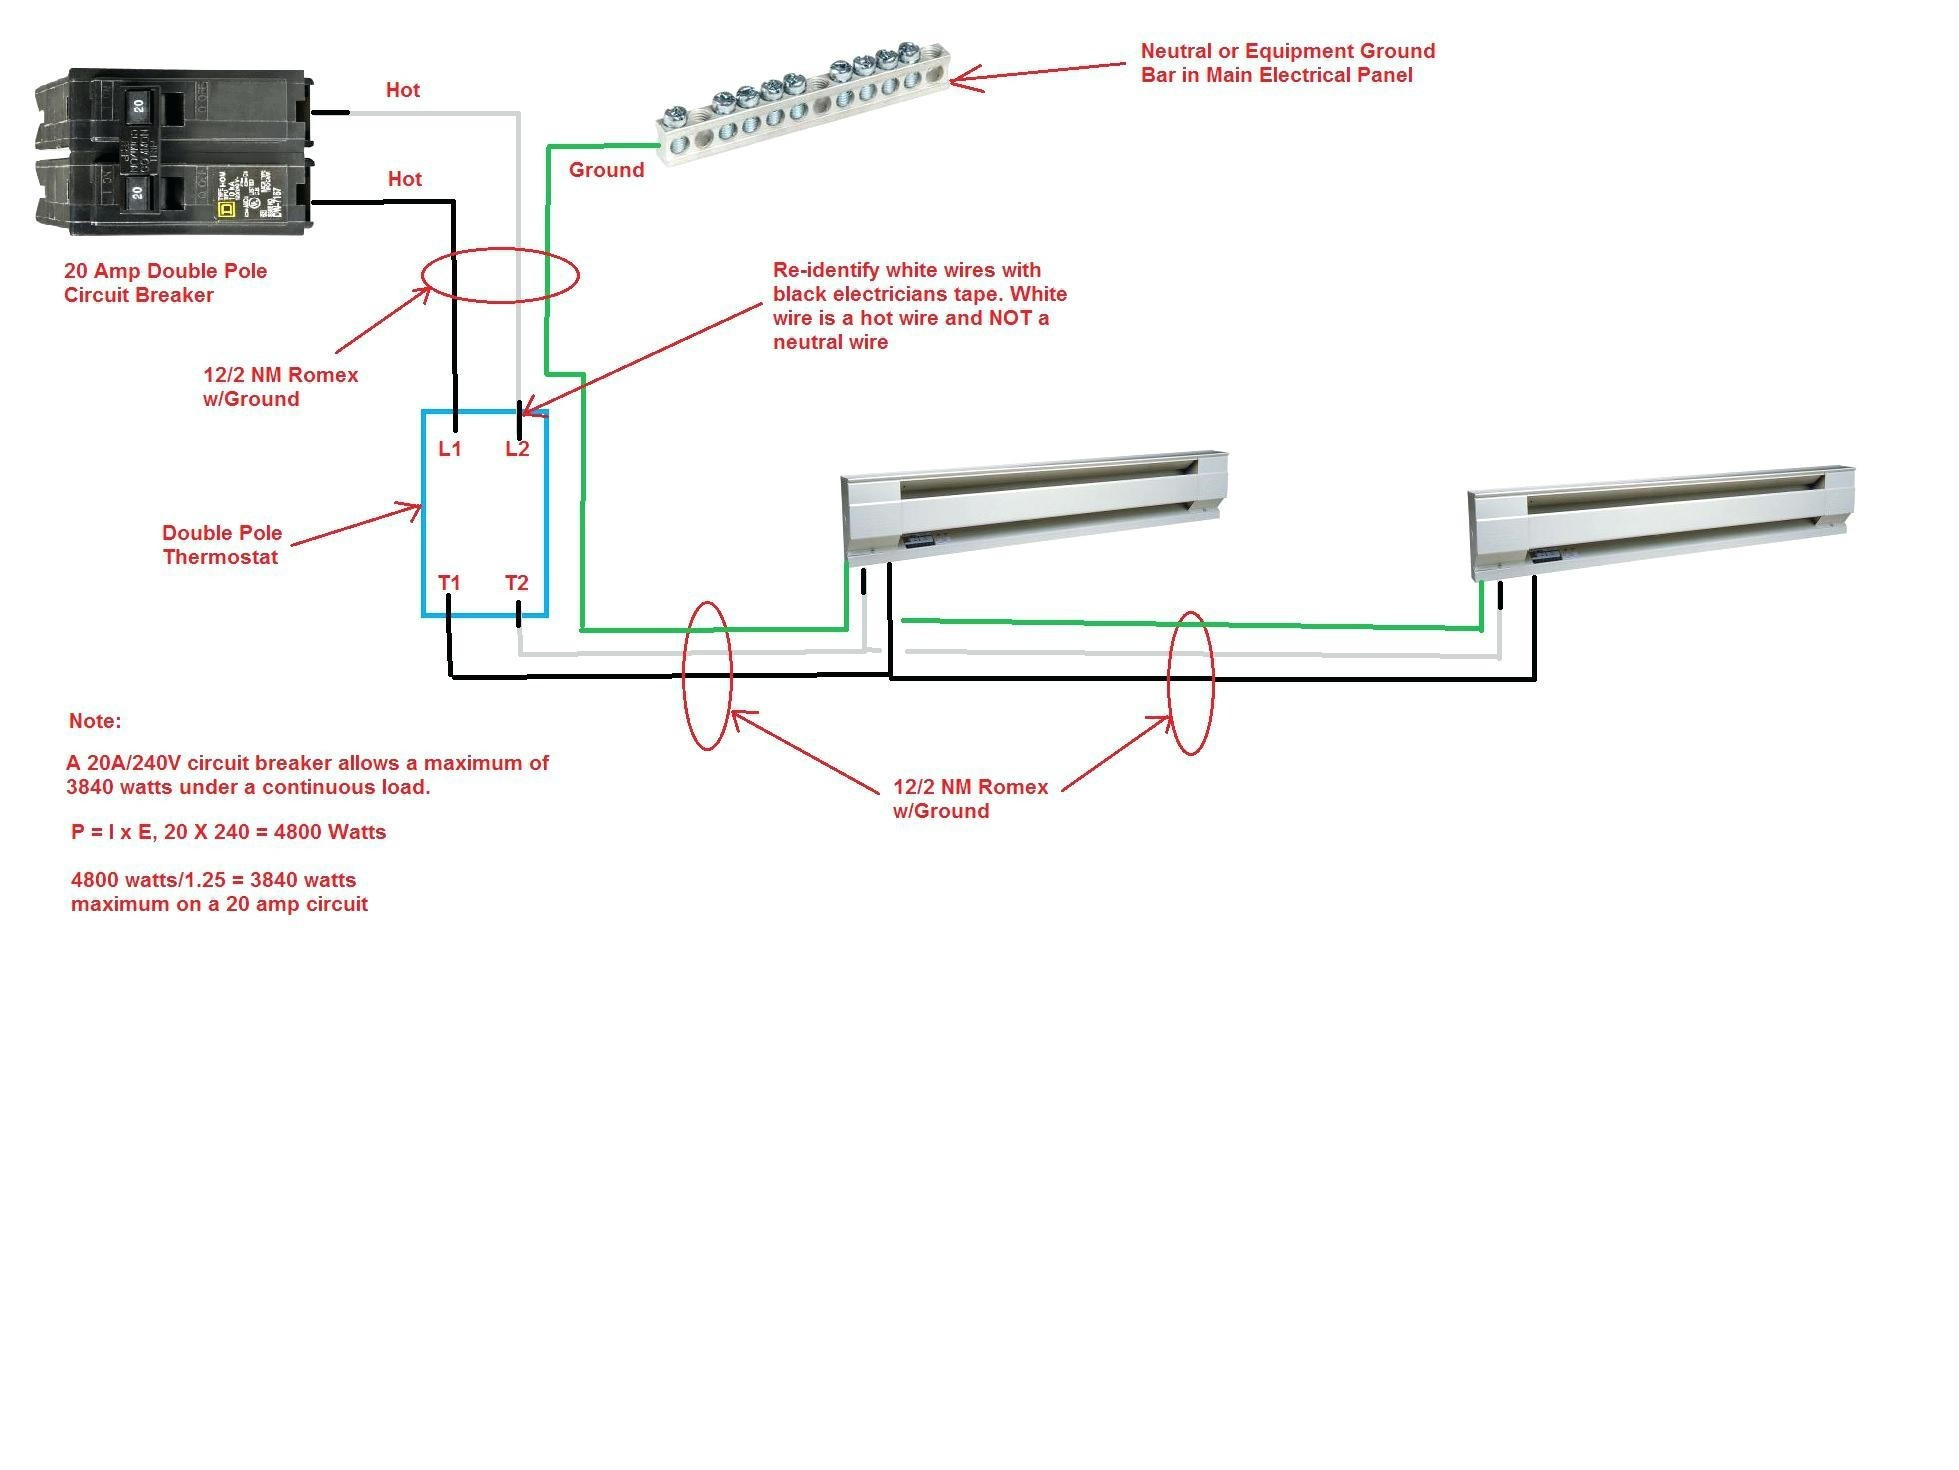 Thermostat Wiring Diagram Wiring Diagram For Thermostat On Basic Electric Furnace Wiring